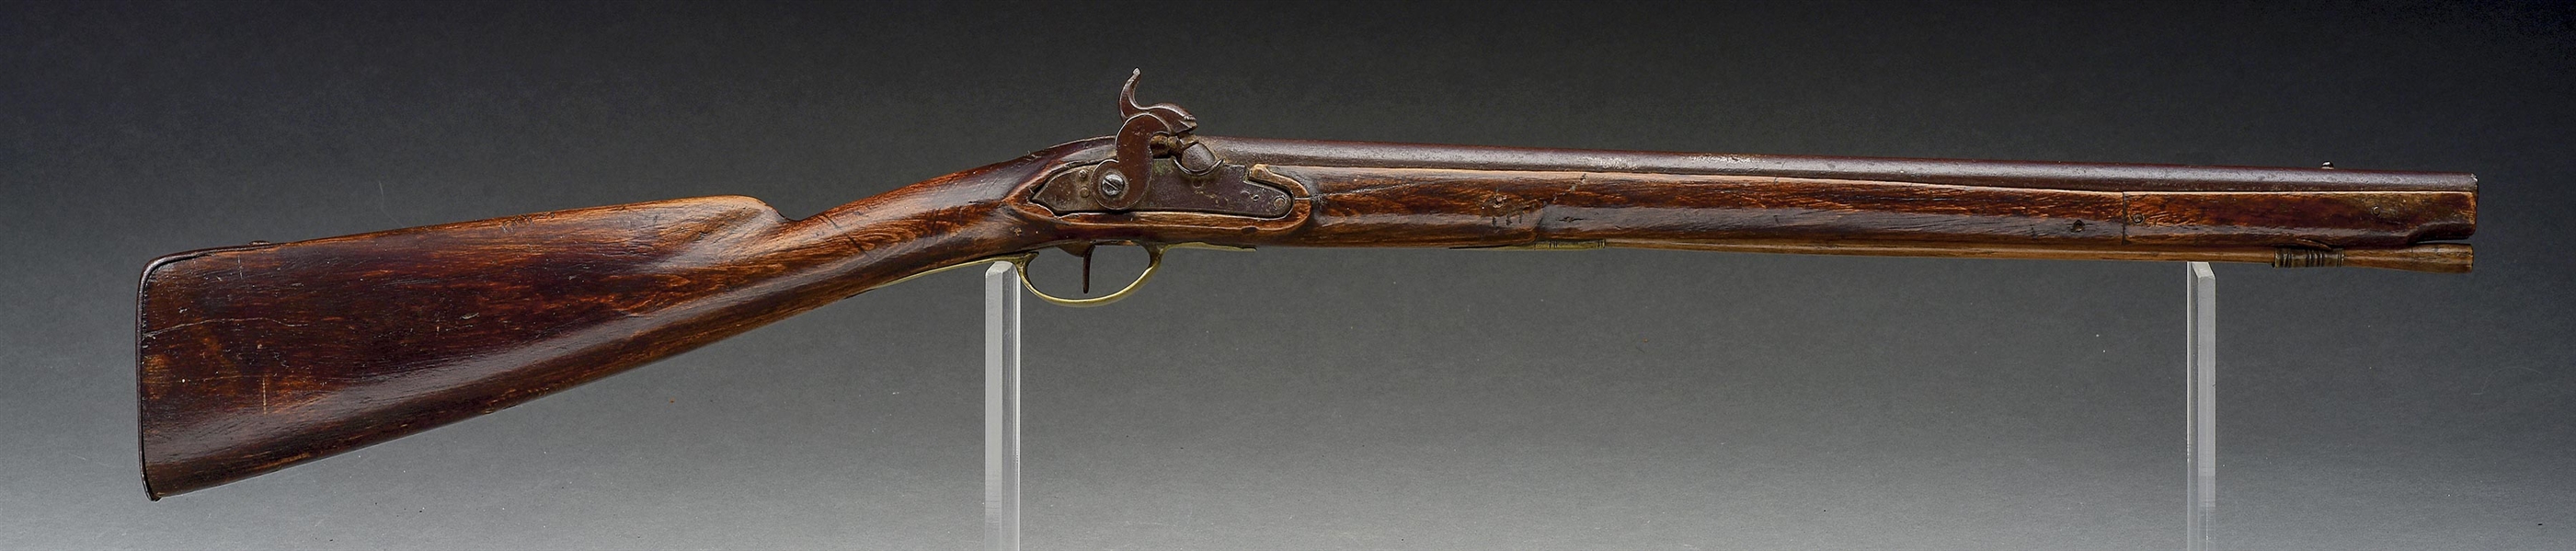 (A) DIMINUTIVE AMERICAN PERCUSSION CHILDS RIFLE. 